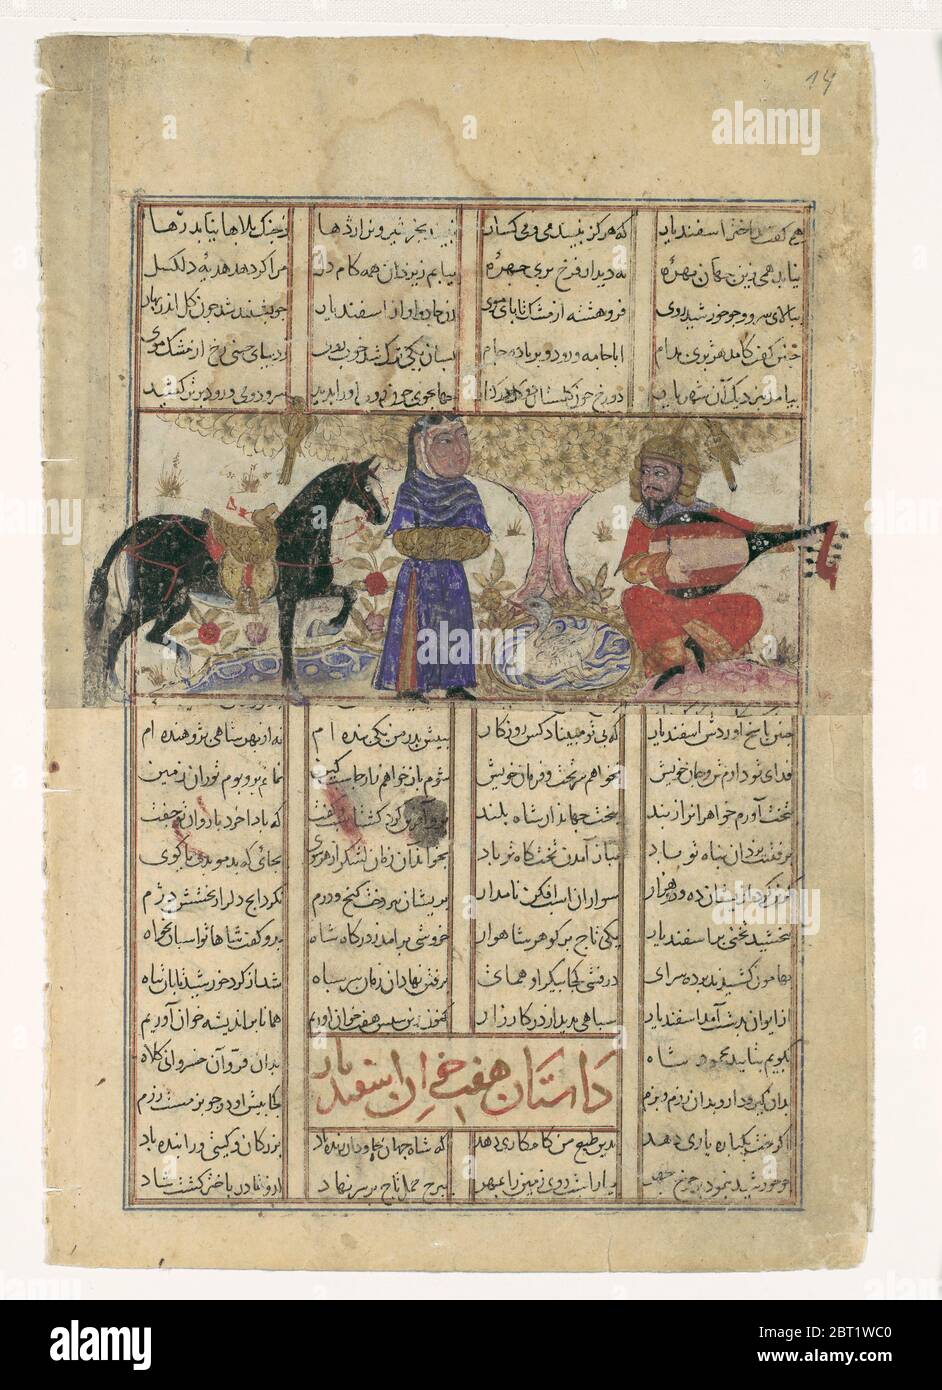 Isfandiyar's Fourth Course: He Slays a Sorceress, Folio from a Shahnama (Book of Kings) of Firdausi, ca. 1330-40. Stock Photo